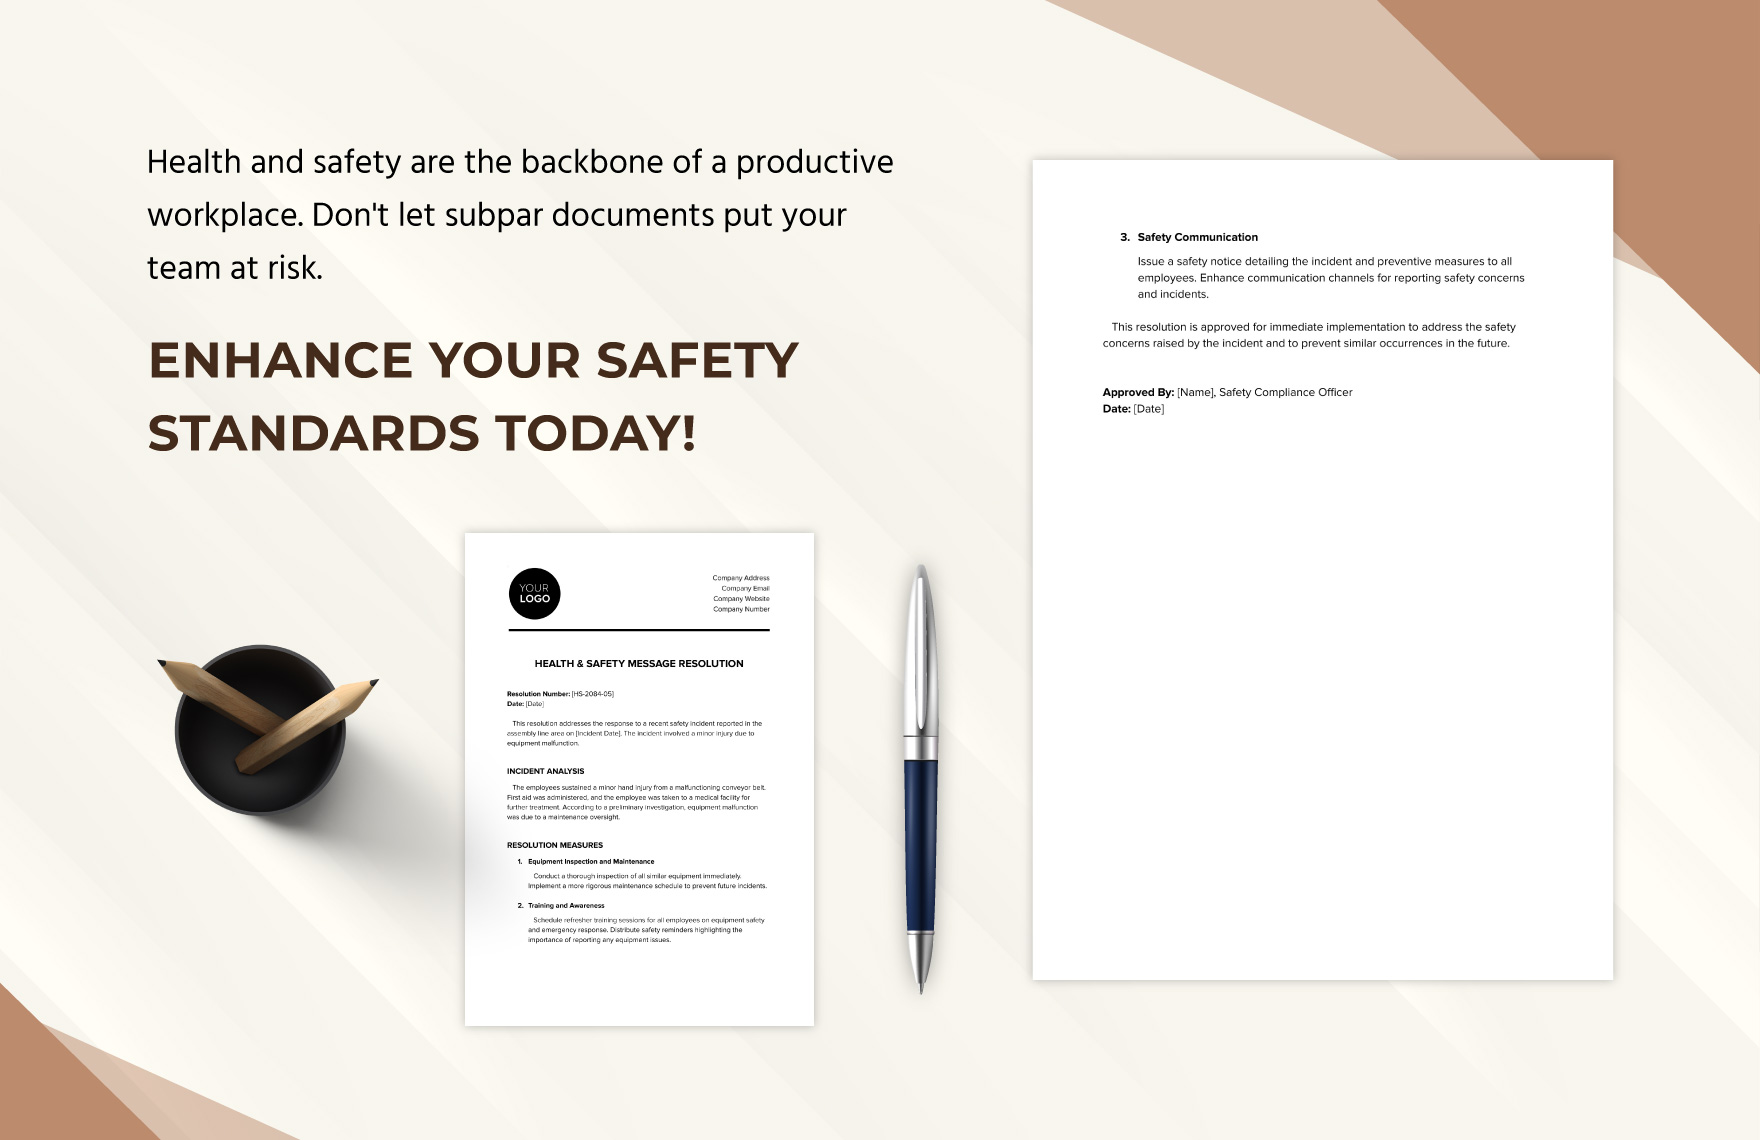 Health & Safety Message Resolution Template